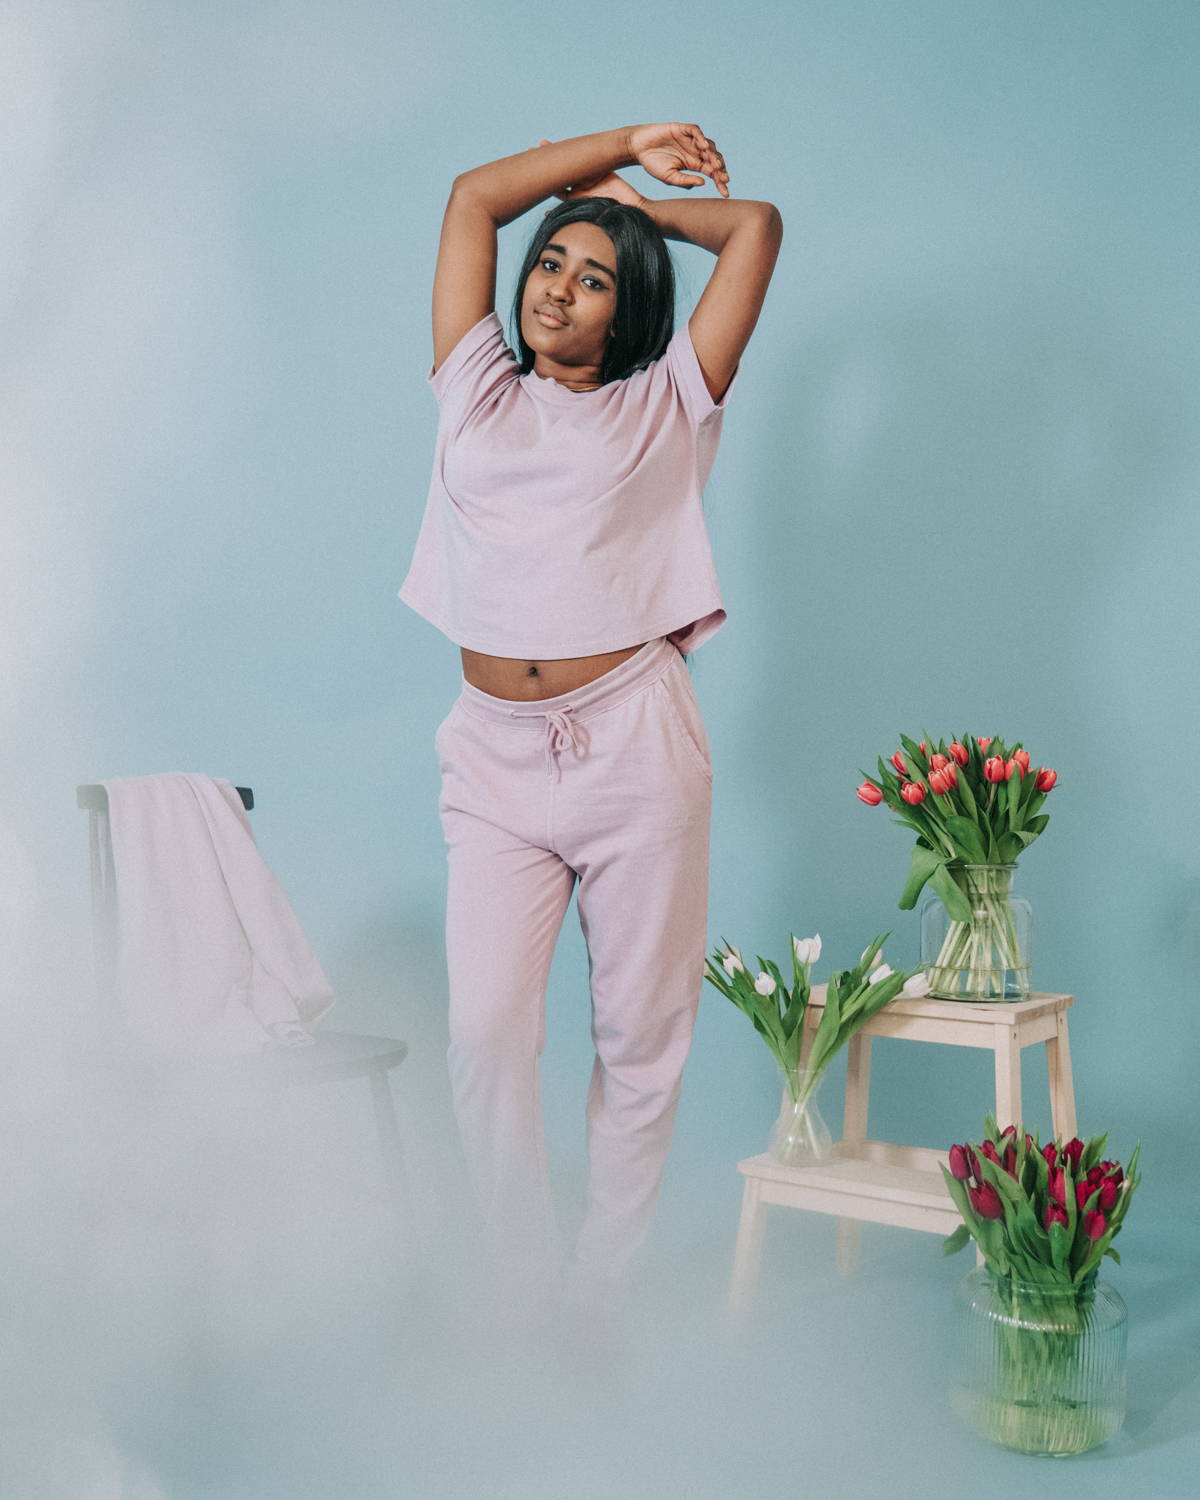 Shop the collection of sustainable and ethically made organic cotton lounge wear, perfect for working from home or lounging on the weekend. Shop the collection now at Sancho's, the home of sustainable fashion in Exeter, UK.